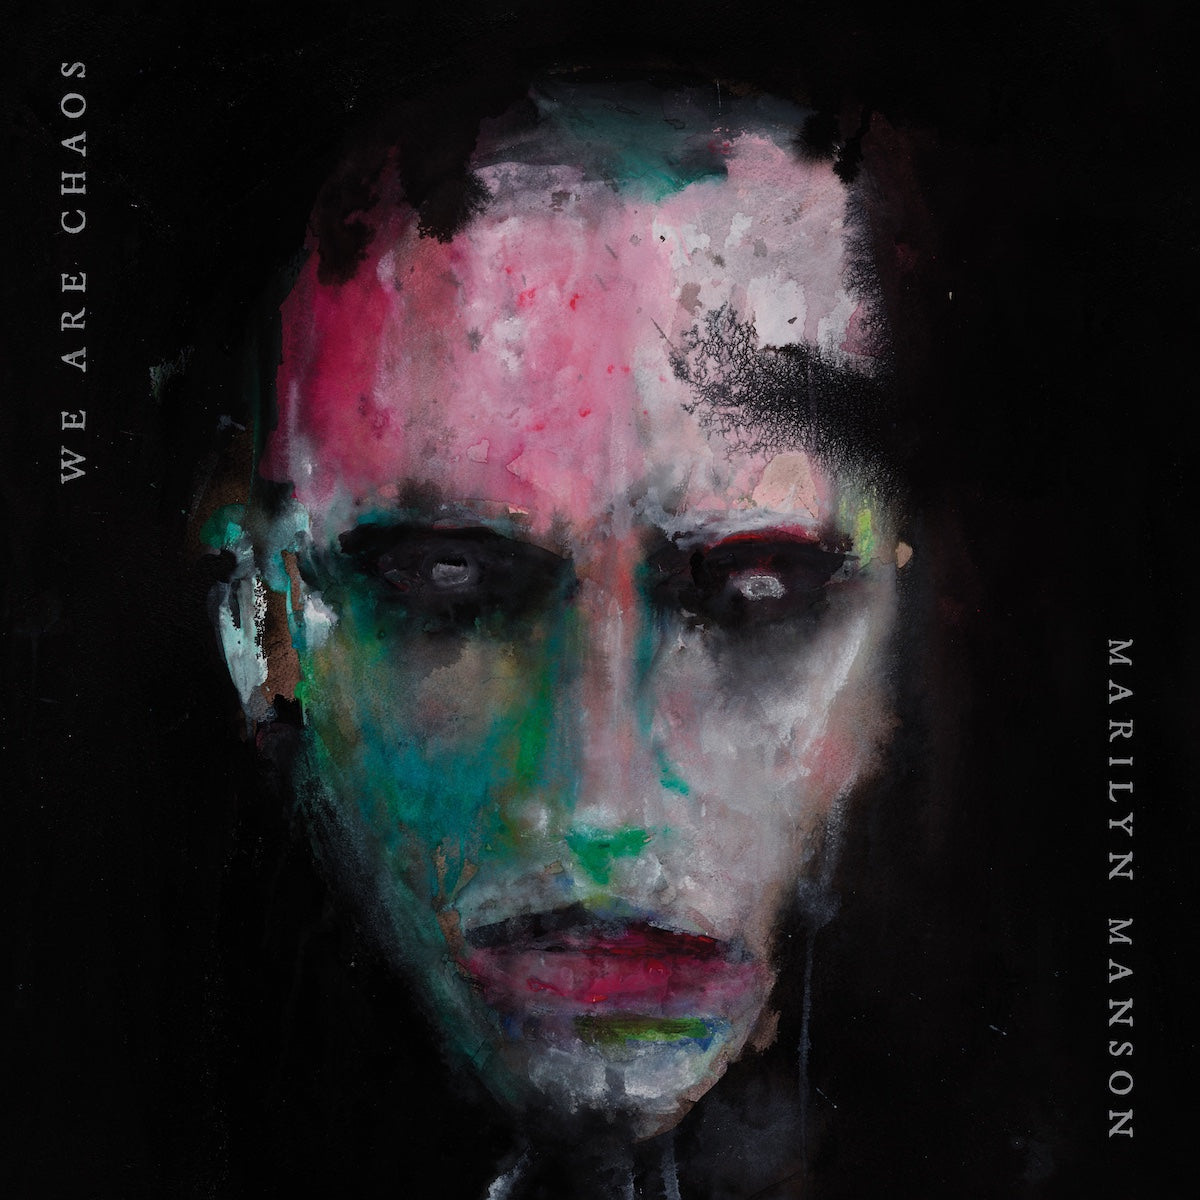 Marilyn Manson - We Are Chaos LP